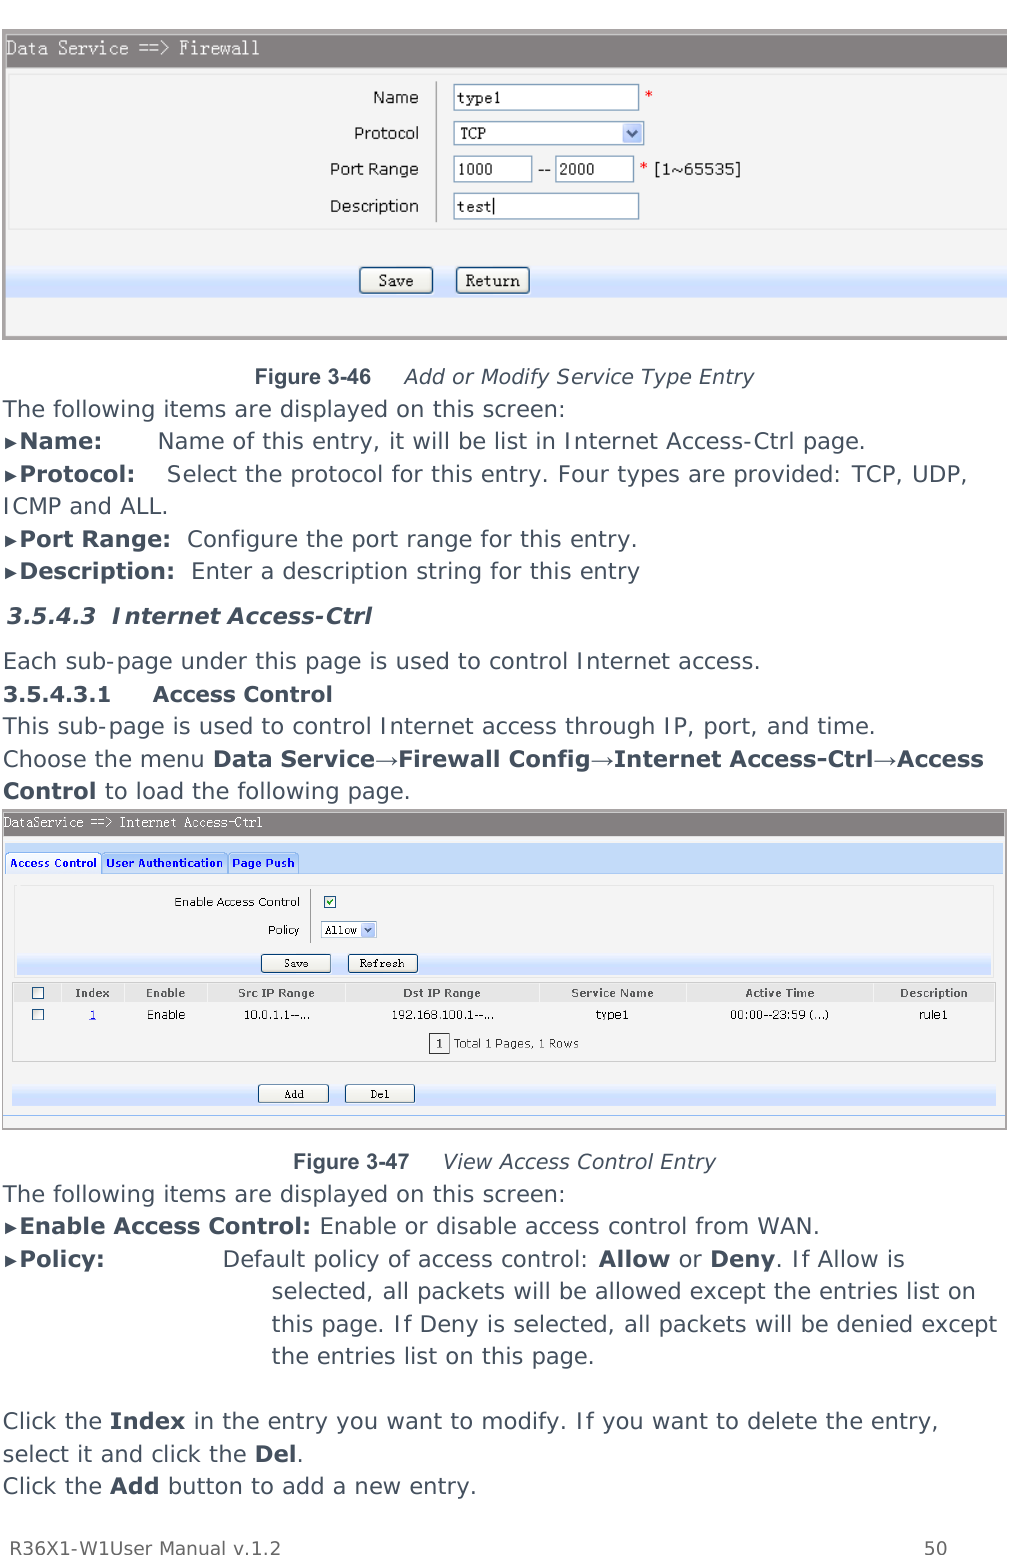           R36X1-W1User Manual v.1.2    50   Figure 3-46  Add or Modify Service Type Entry The following items are displayed on this screen: ►Name:       Name of this entry, it will be list in Internet Access-Ctrl page. ►Protocol:    Select the protocol for this entry. Four types are provided: TCP, UDP, ICMP and ALL. ►Port Range:  Configure the port range for this entry. ►Description:  Enter a description string for this entry 3.5.4.3 Internet Access-Ctrl Each sub-page under this page is used to control Internet access. 3.5.4.3.1 Access Control This sub-page is used to control Internet access through IP, port, and time. Choose the menu Data Service→Firewall Config→Internet Access-Ctrl→Access Control to load the following page.  Figure 3-47  View Access Control Entry The following items are displayed on this screen: ►Enable Access Control: Enable or disable access control from WAN. ►Policy:               Default policy of access control: Allow or Deny. If Allow is selected, all packets will be allowed except the entries list on this page. If Deny is selected, all packets will be denied except the entries list on this page.  Click the Index in the entry you want to modify. If you want to delete the entry, select it and click the Del. Click the Add button to add a new entry. 